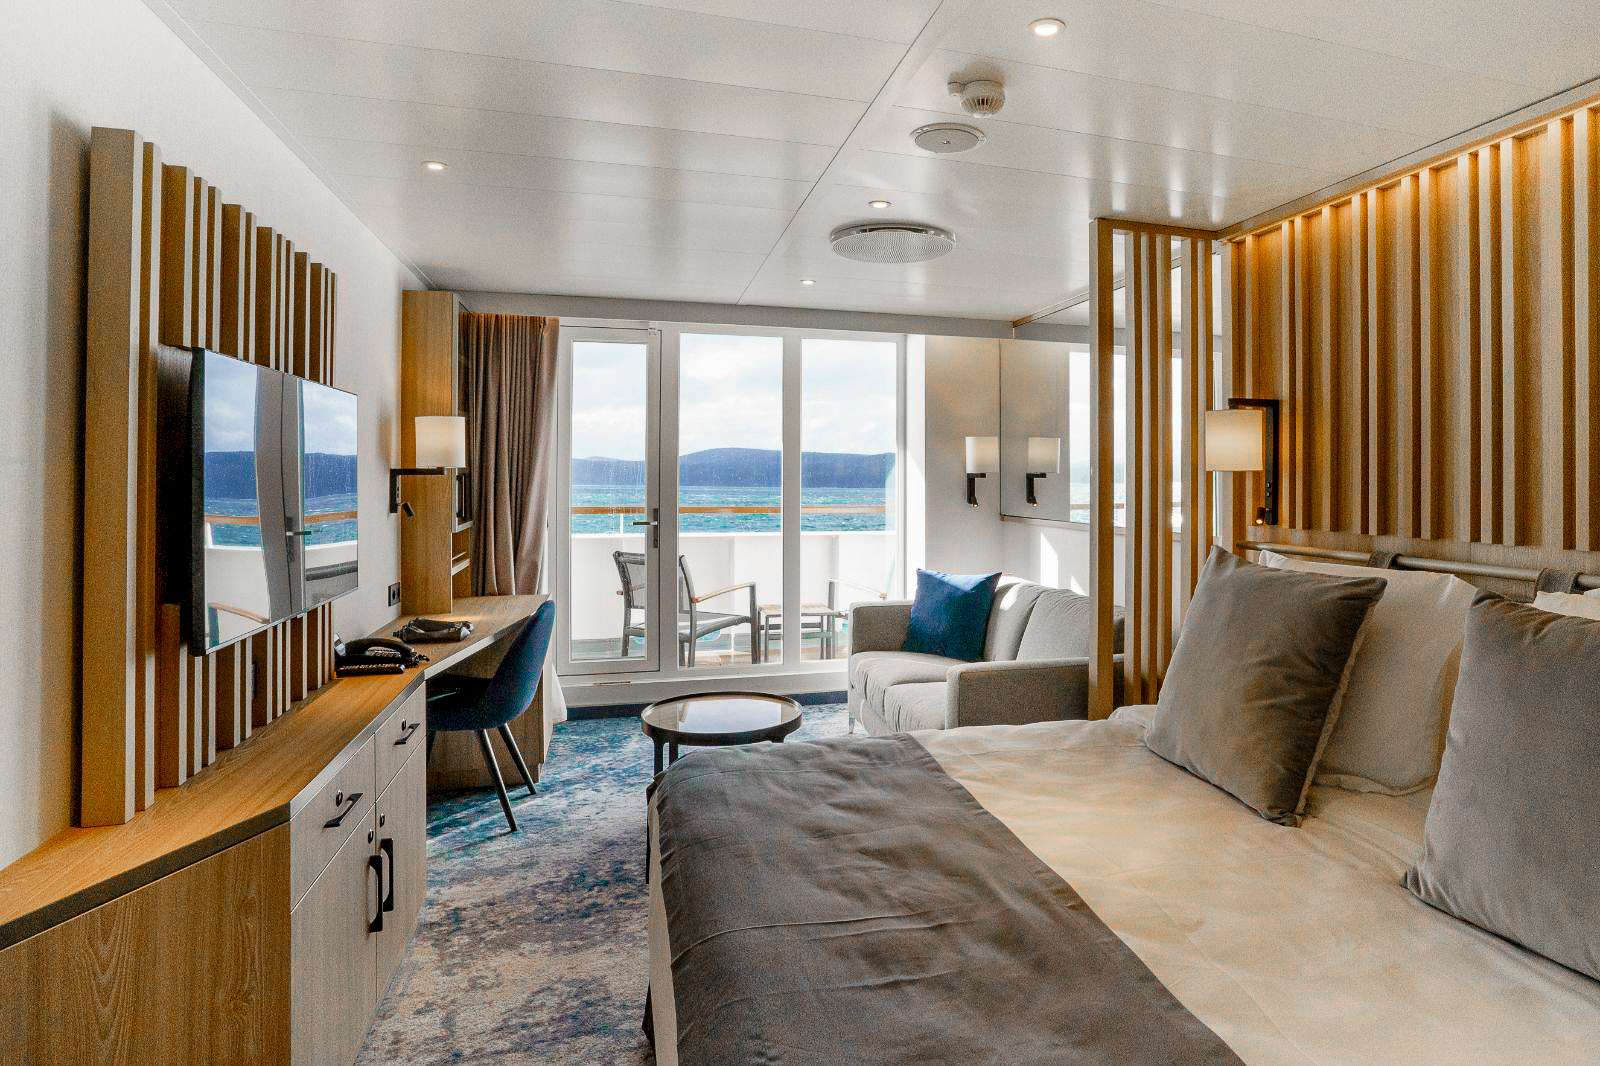 Balcony suite onboard Quark Expeditions' Ultramarine cruise ship in the Arctic